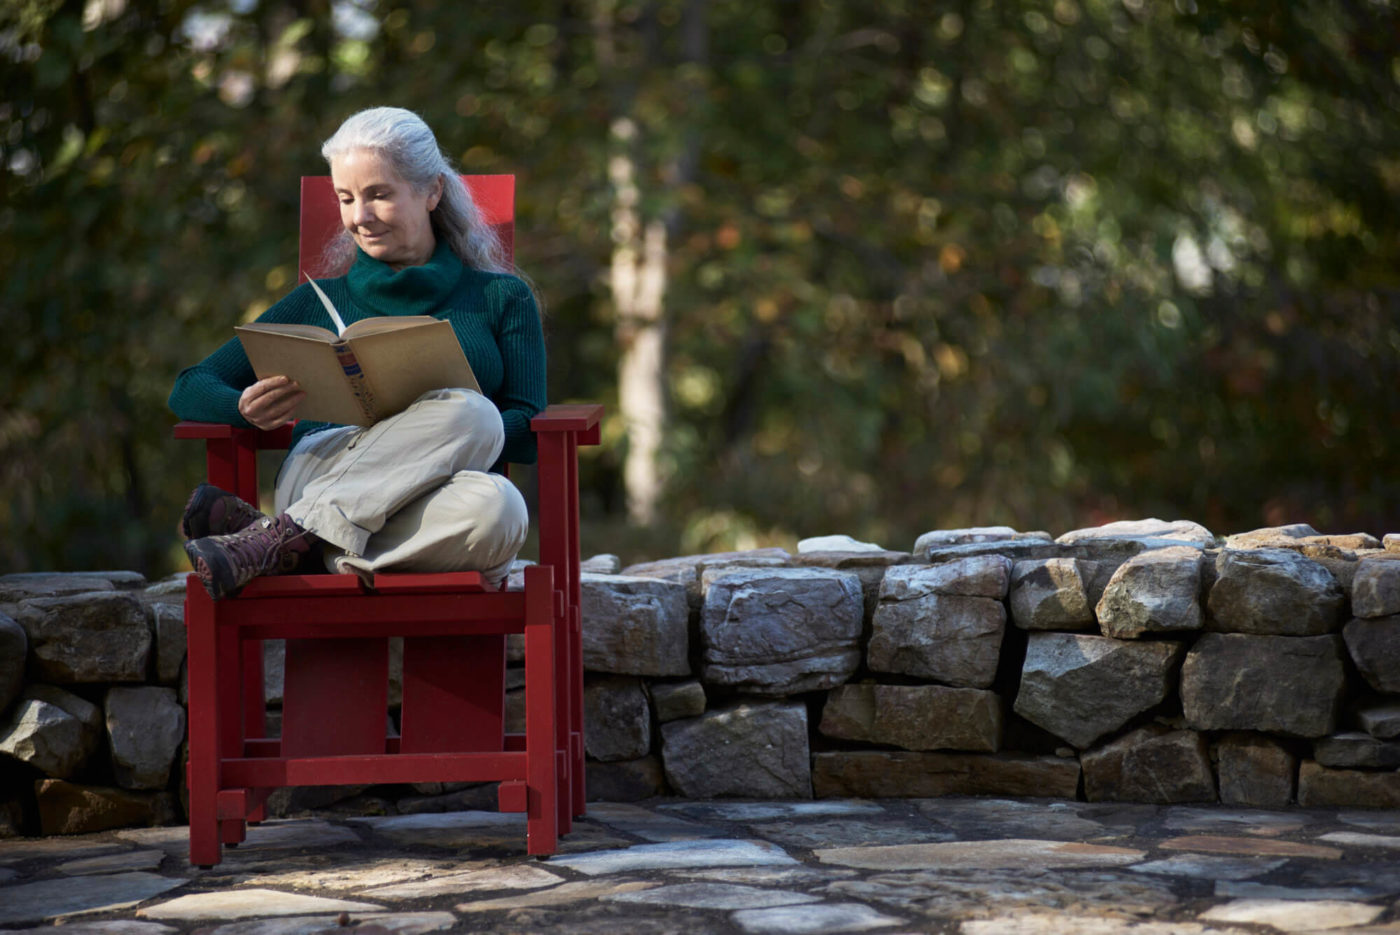 A woman with white hair sits and reads a book in a red Adirondack chair at High Ground Park.